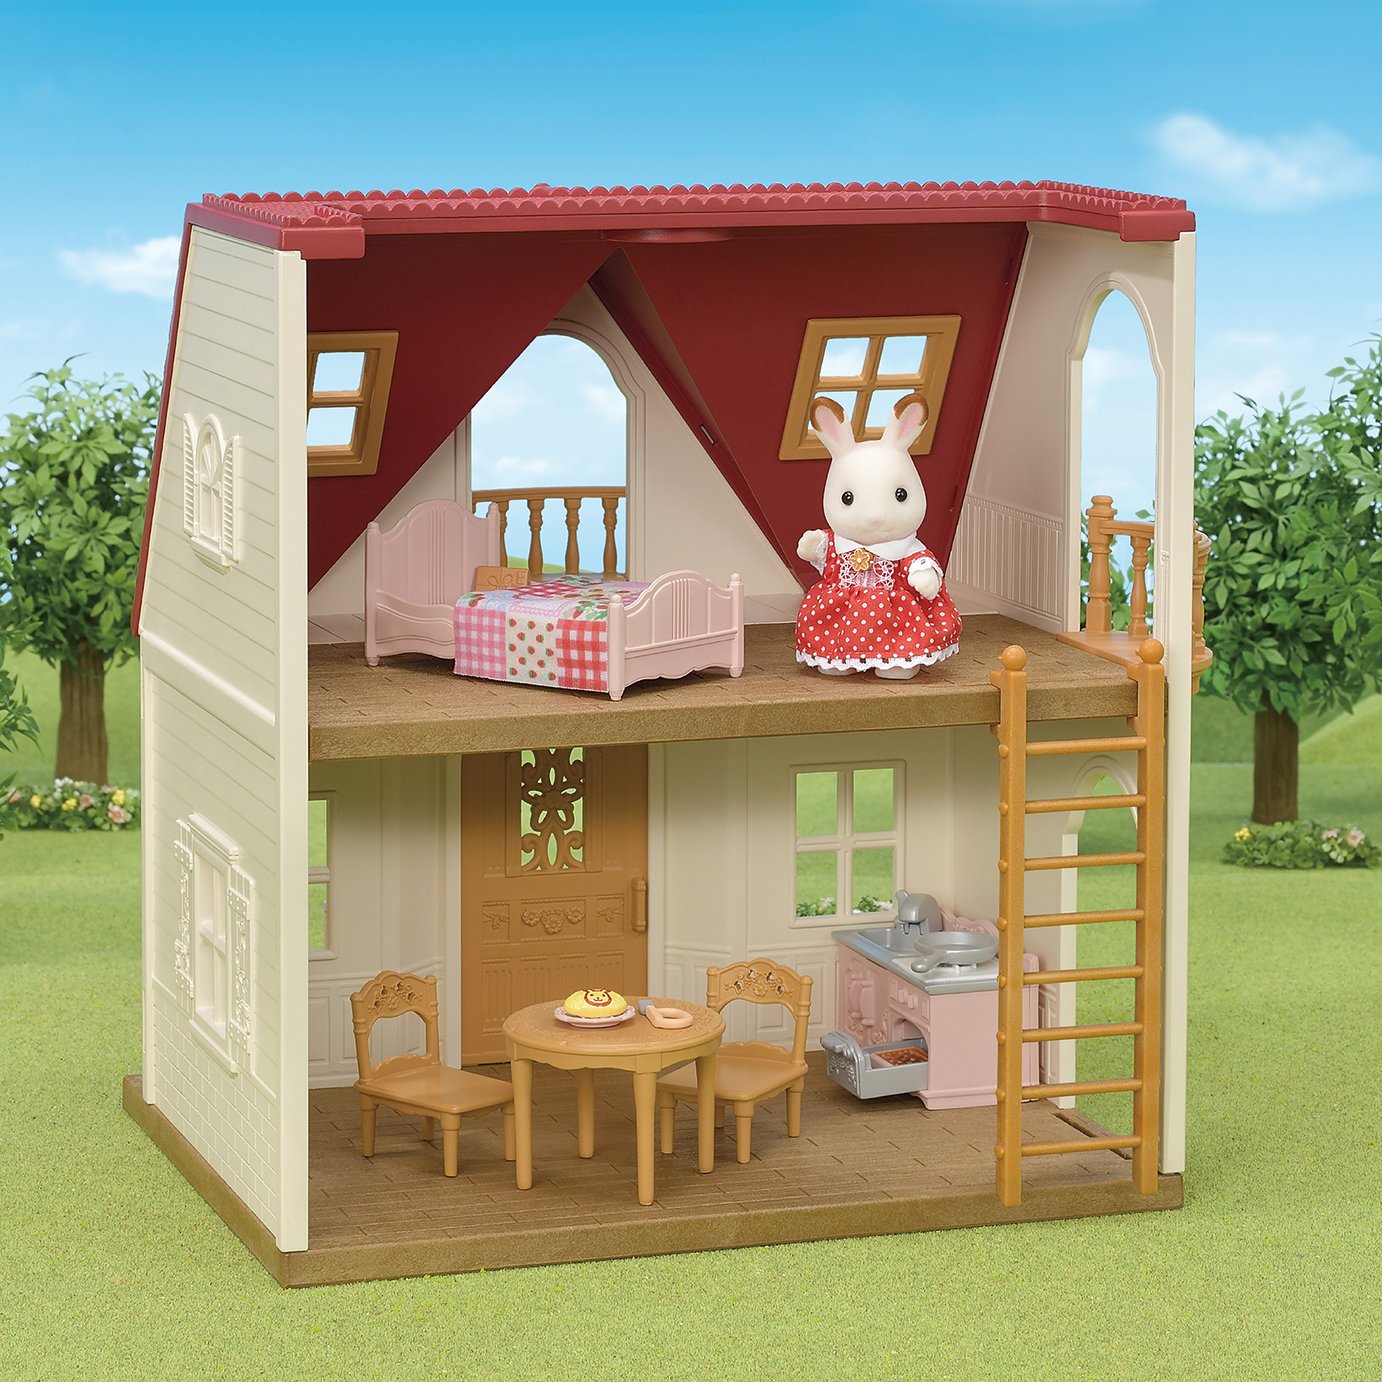 Sylvanian Families New Red Roof Cosy Cottage